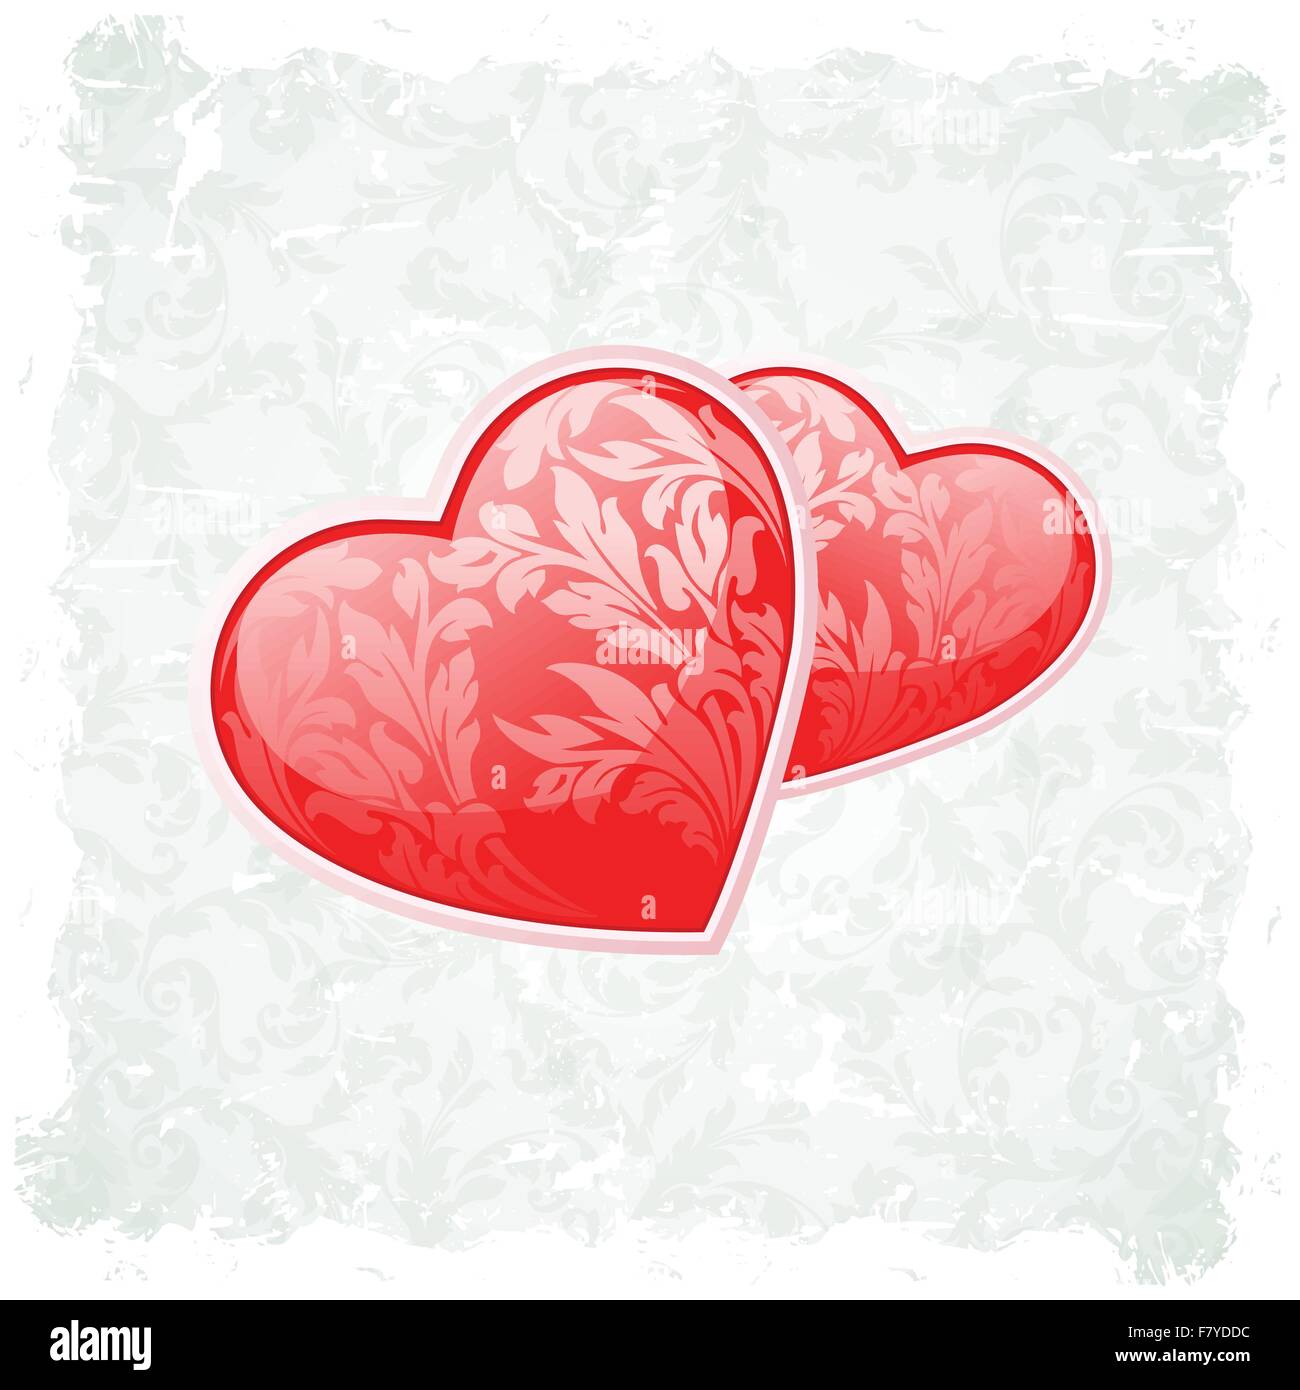 Grungy Valentine's Day Background Stock Vector